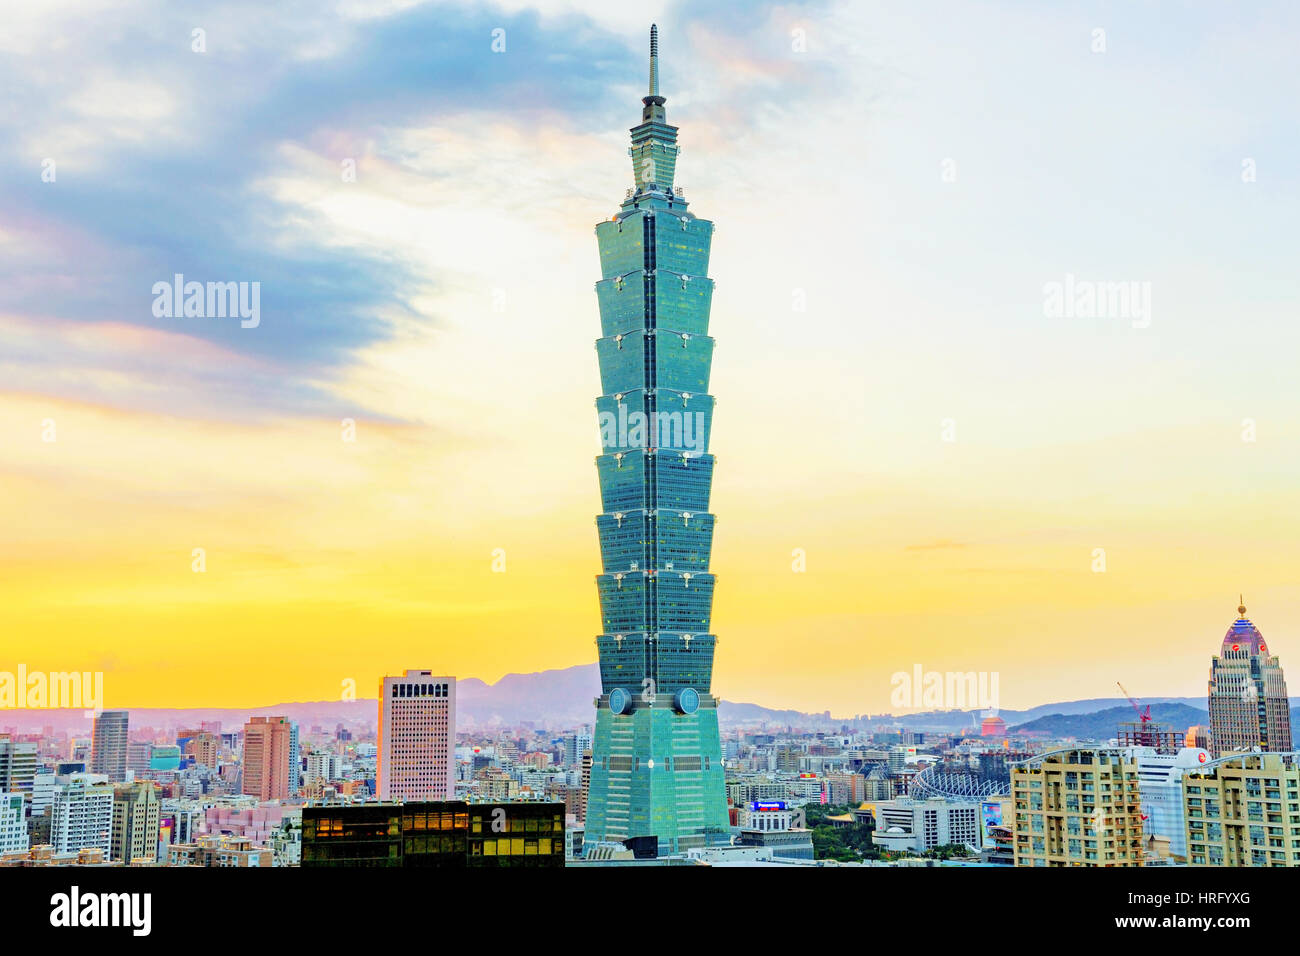 TAIPEI, TAIWAN - AUGUST 29: Taipei 101 building is a famous landmark in Taipei's financial district. This photo was taken at sunset from elephant moun Stock Photo